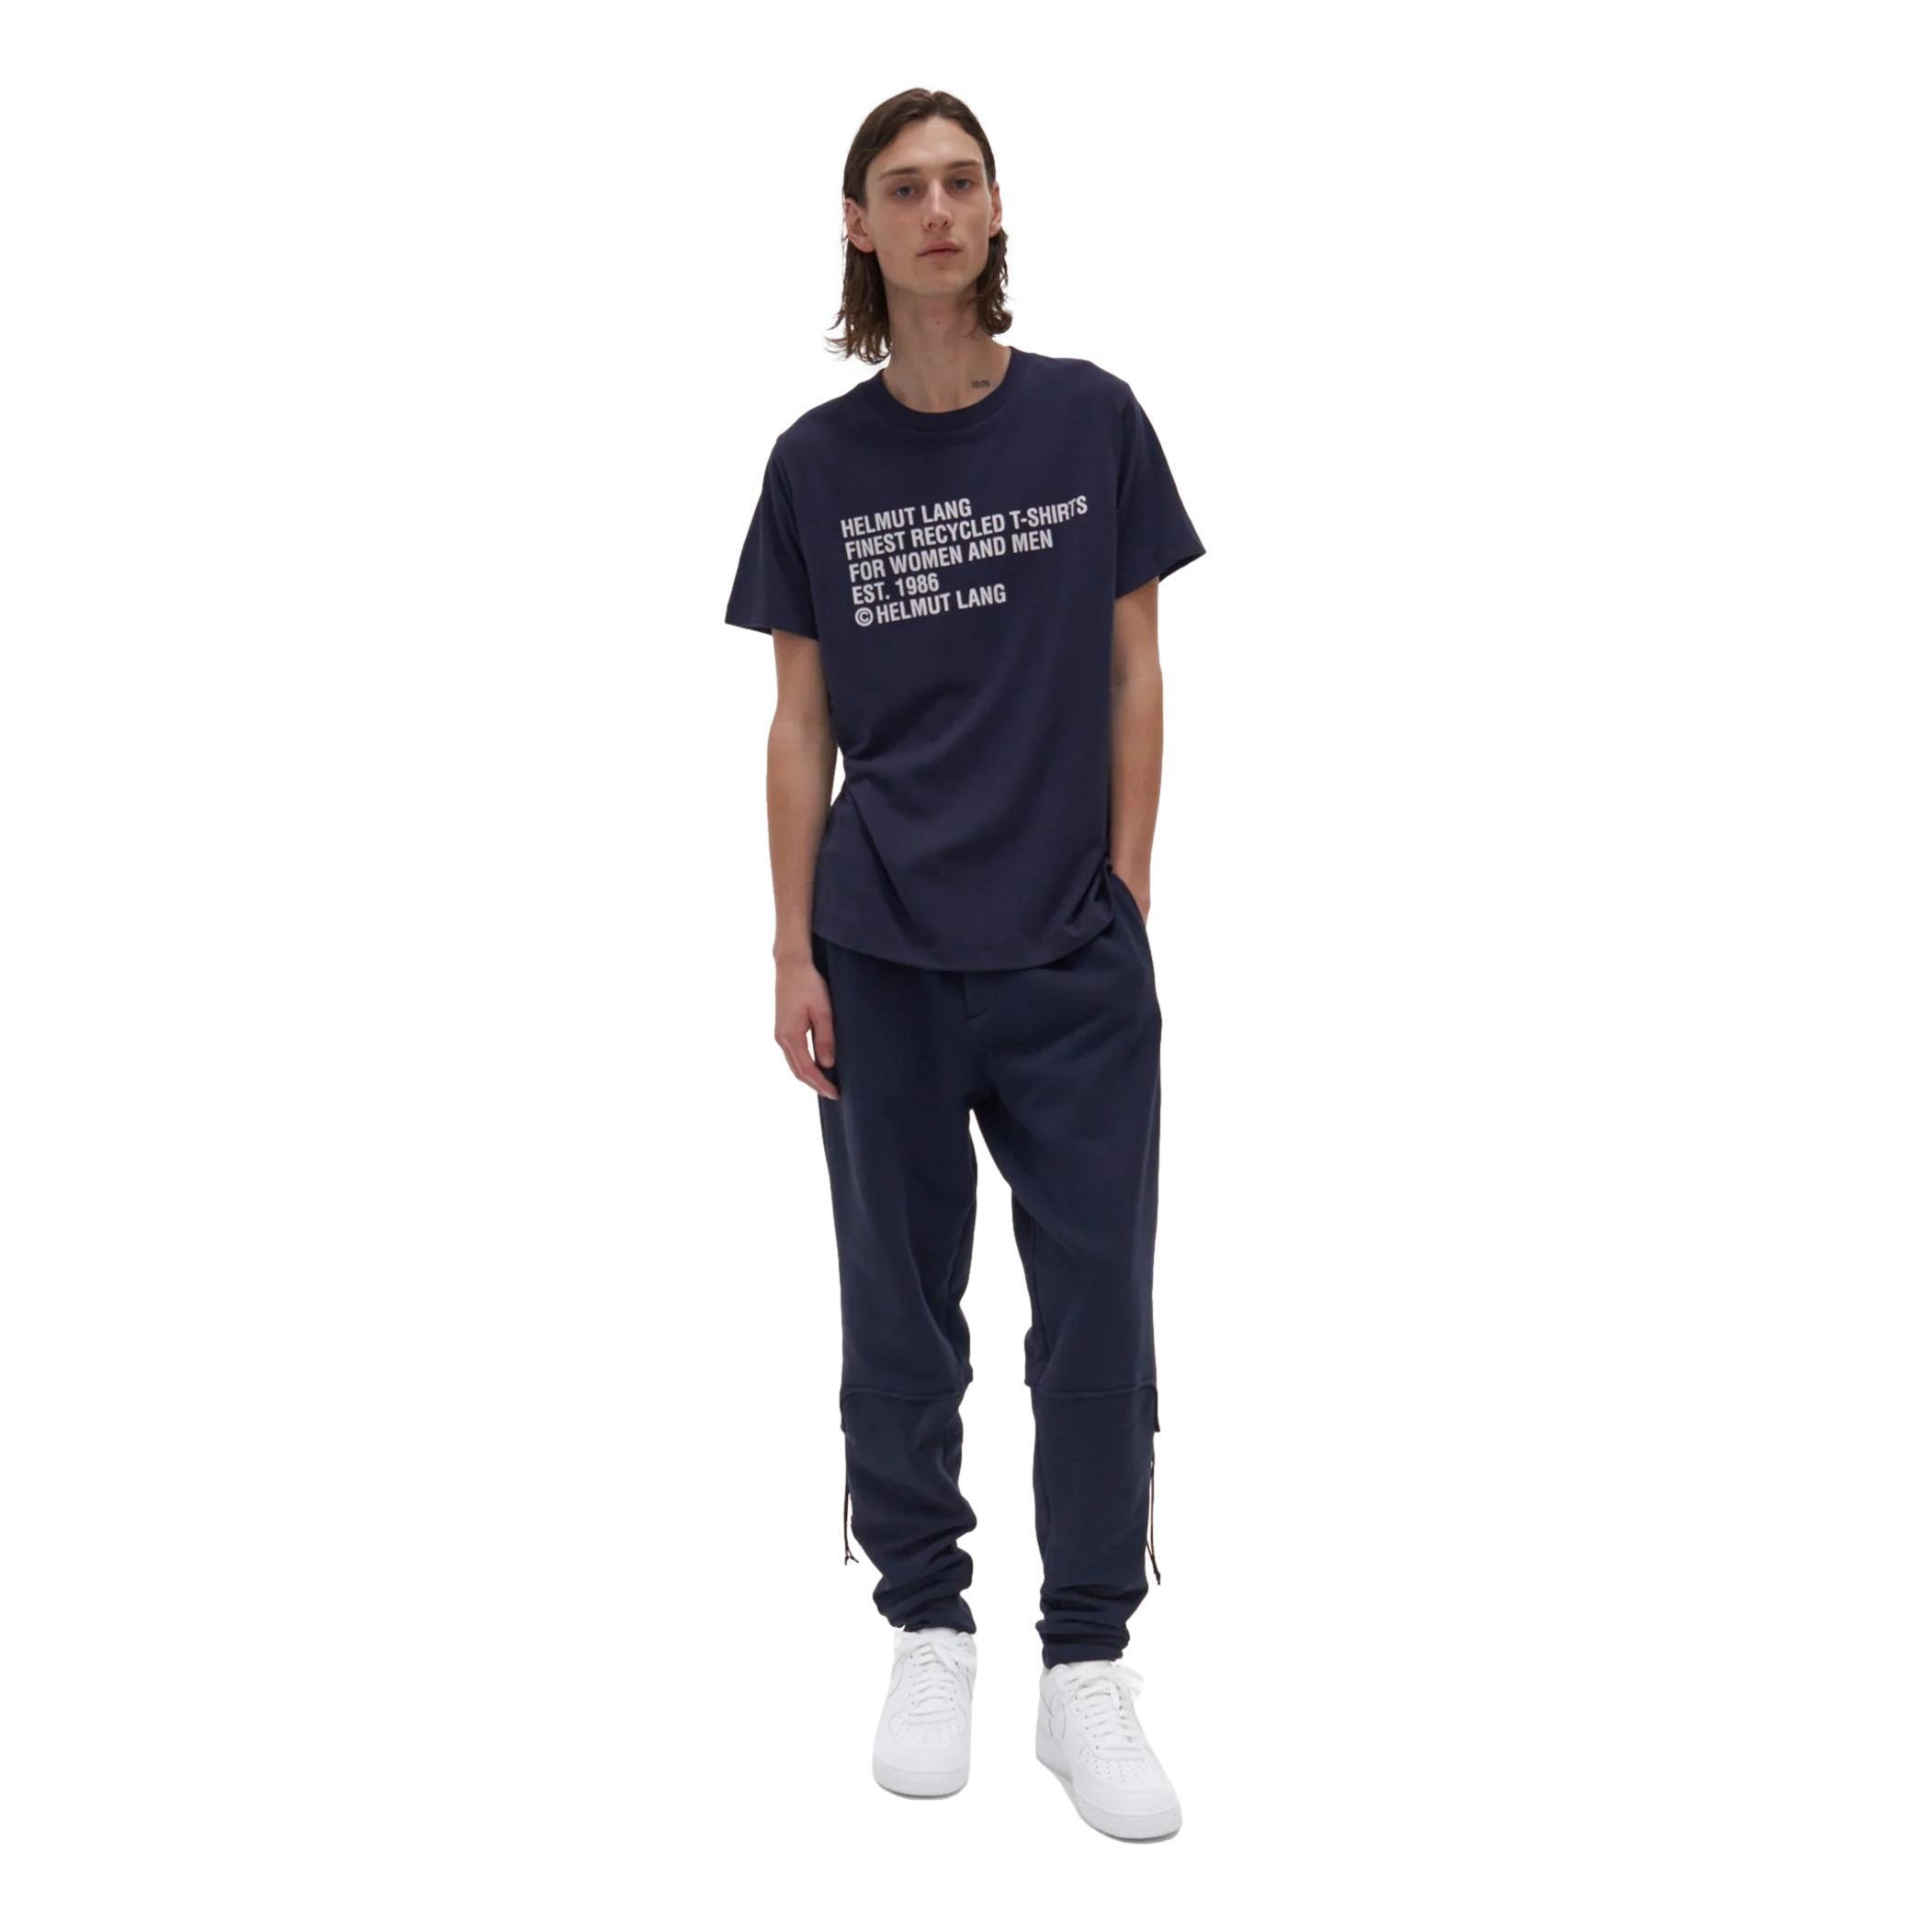 HELMUT LANG RECYCLED JERSEY T-SHIRT - Gravity NYC